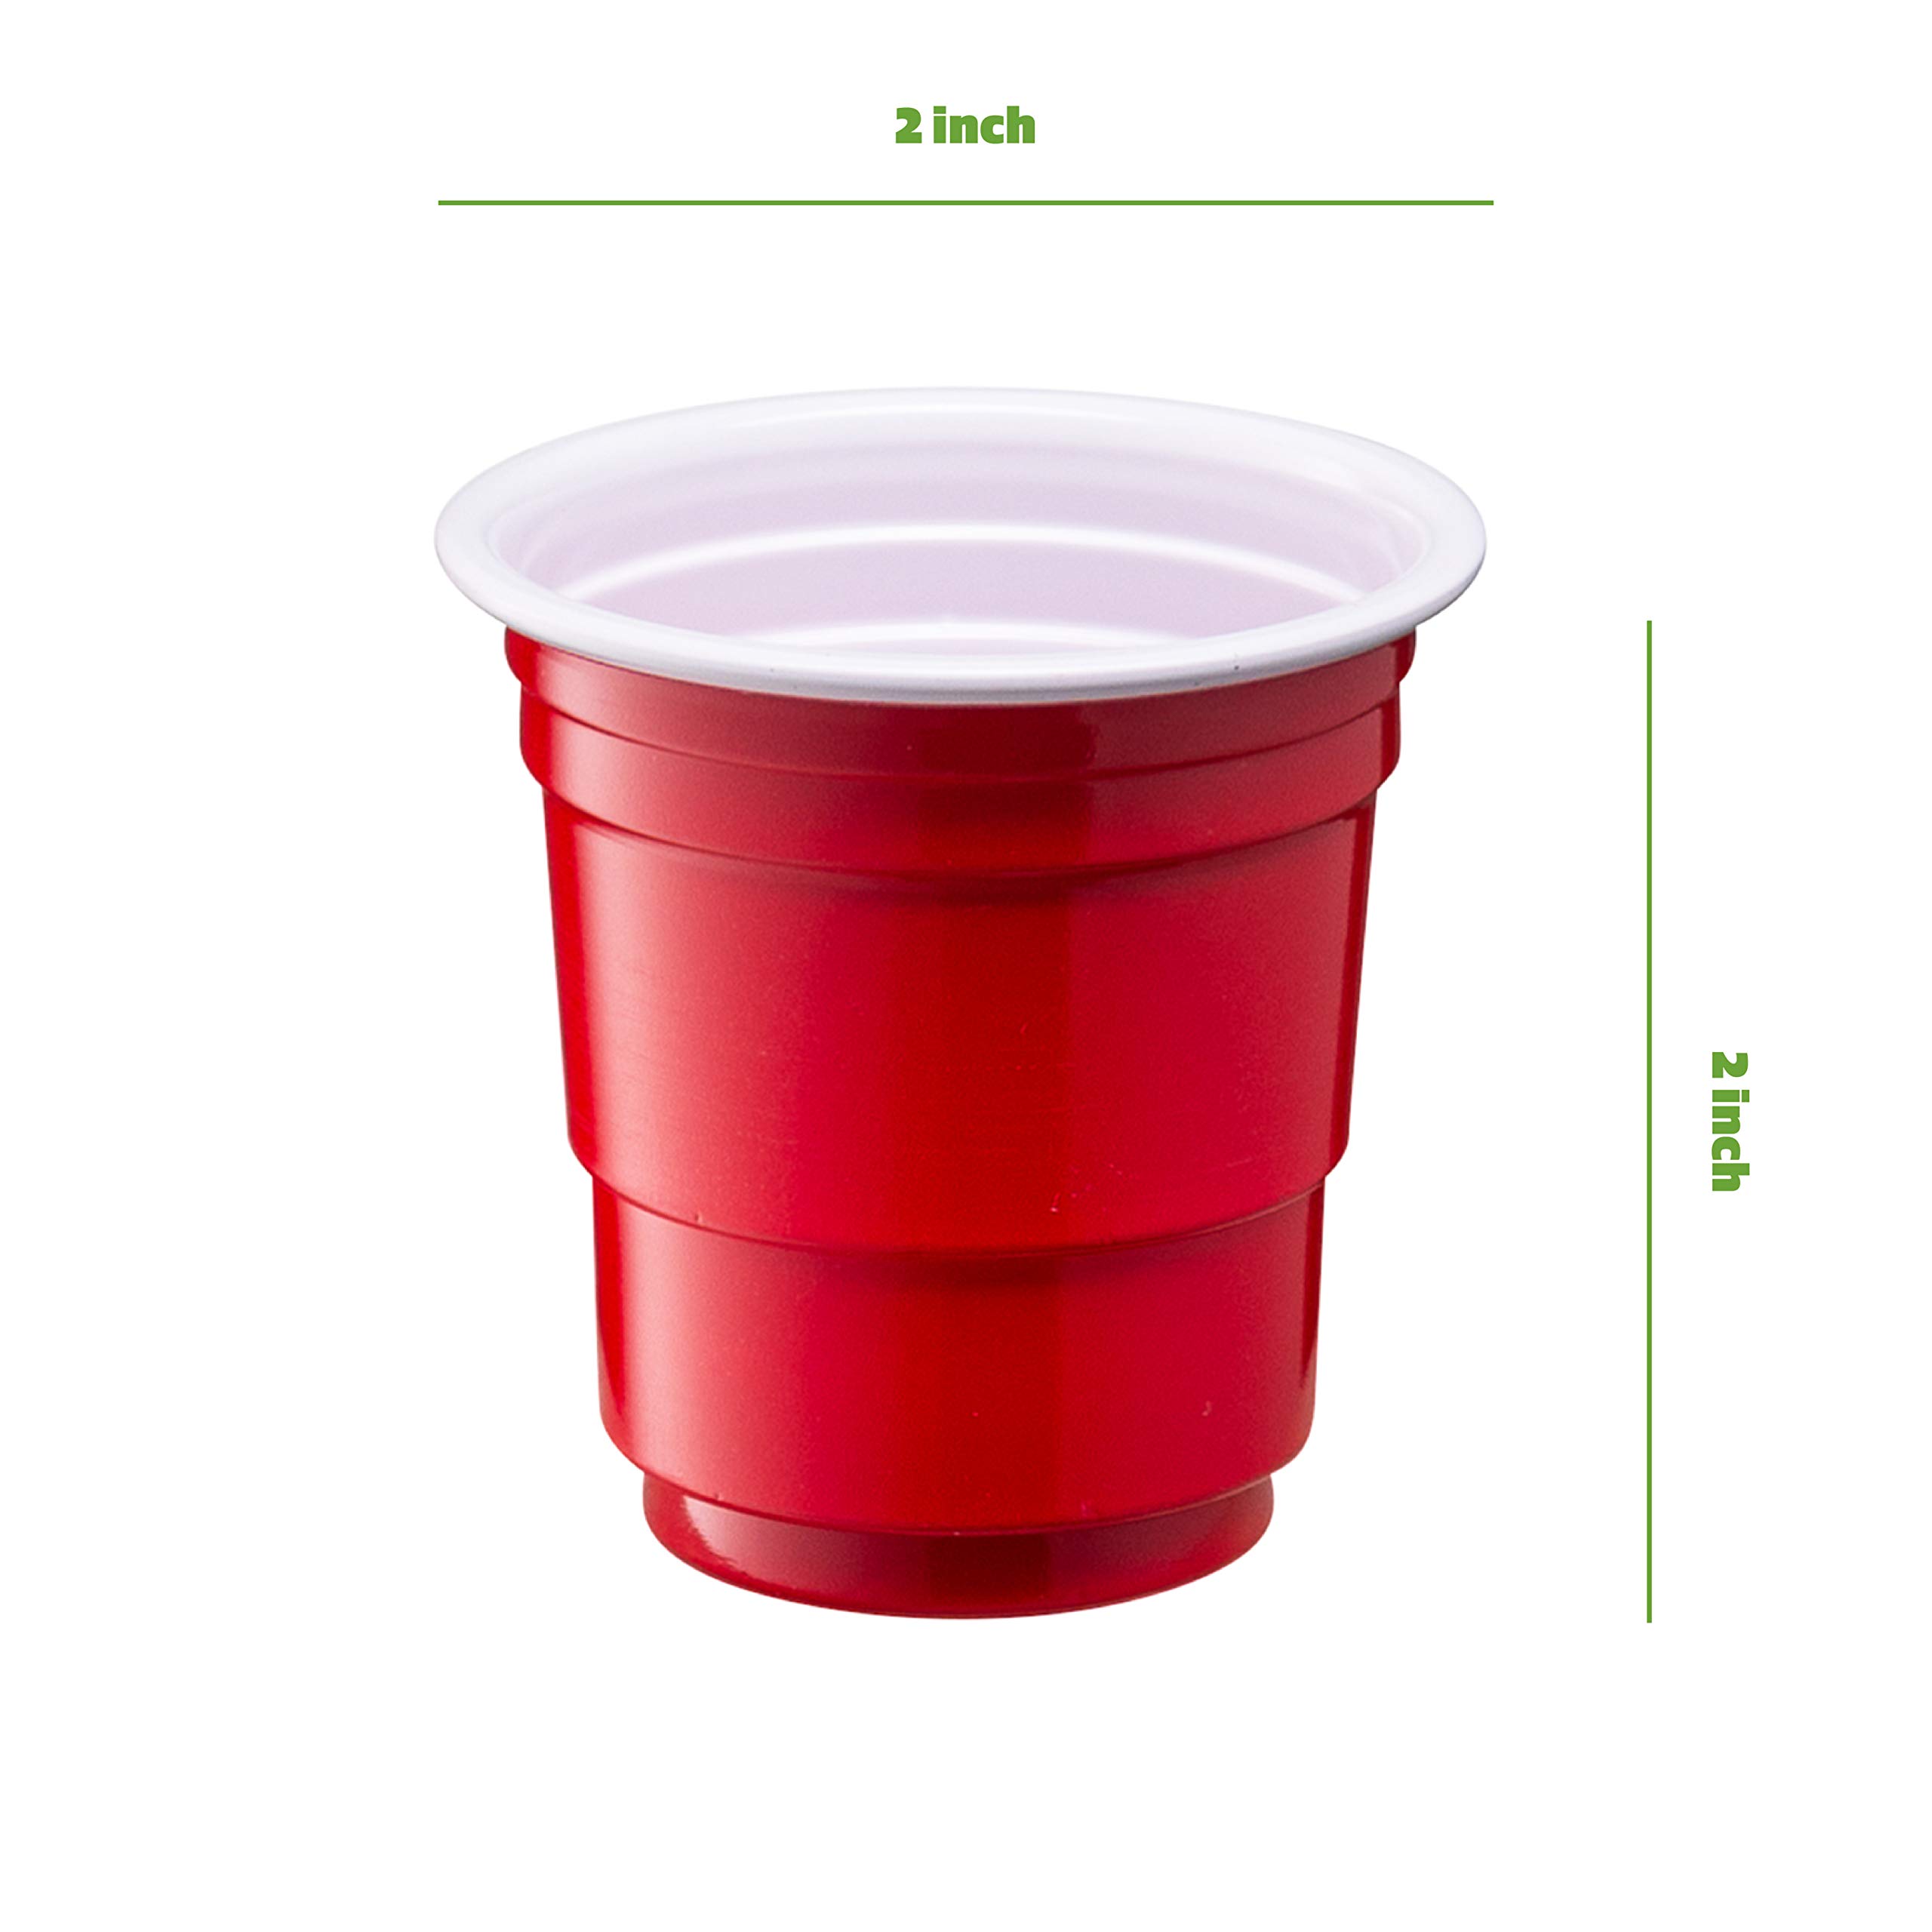 Comfy Package [300 Count] 2 oz. Mini Plastic Shot Glasses - Red Disposable Jello Shot Cups